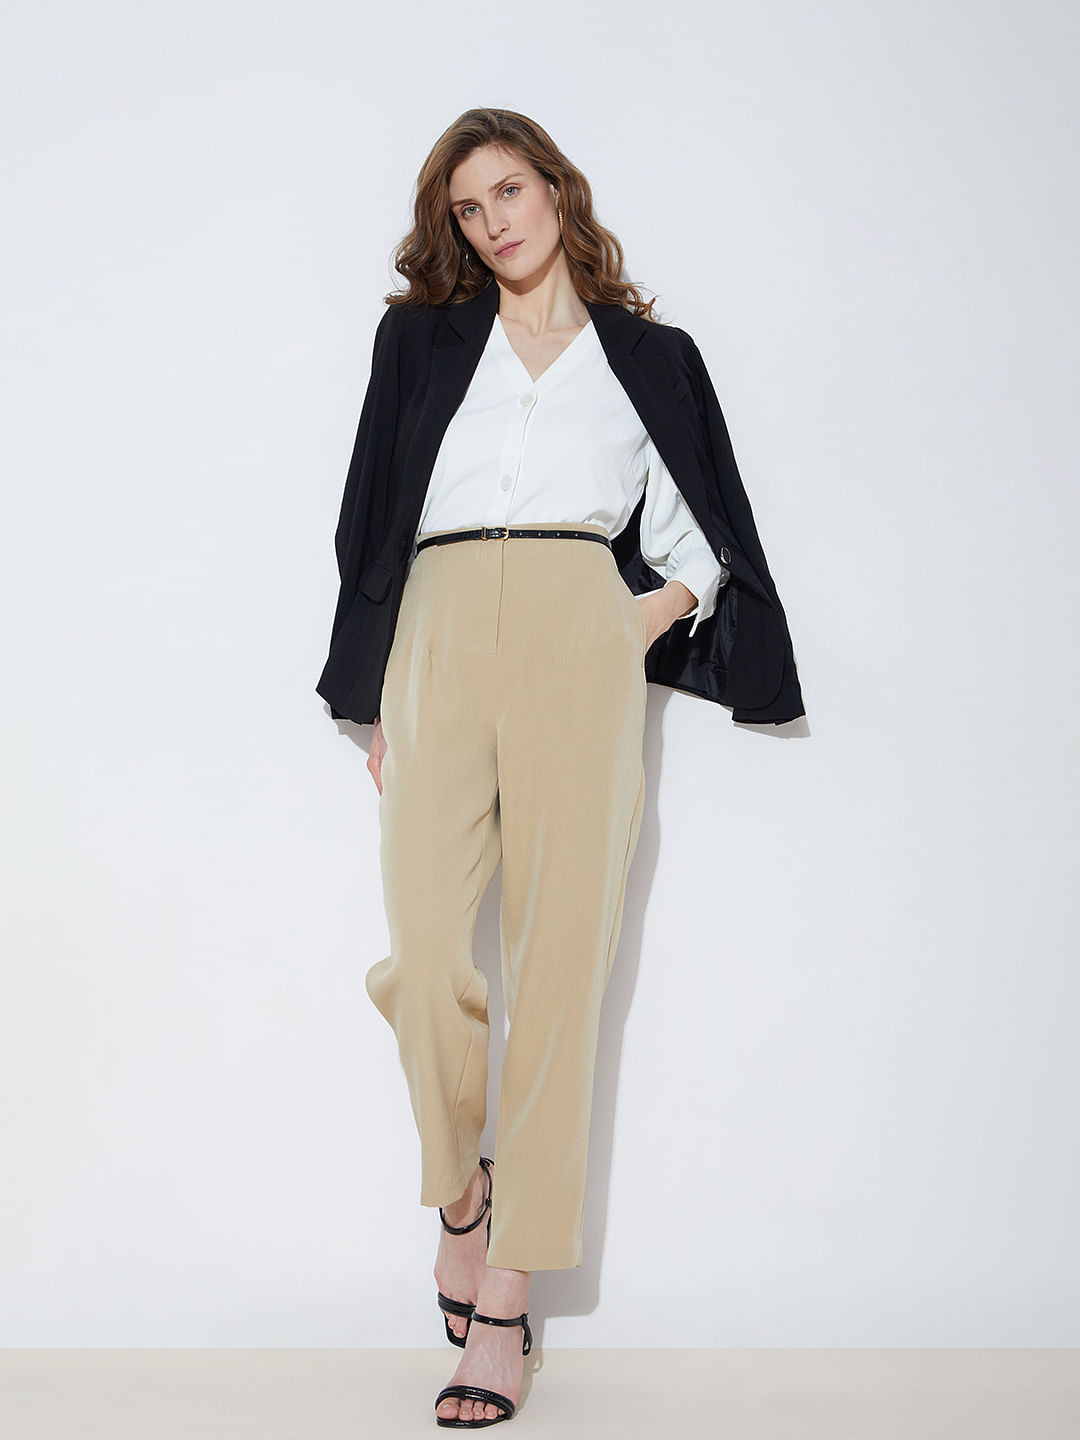 What To Wear With Beige Pants Female  TOPGURL